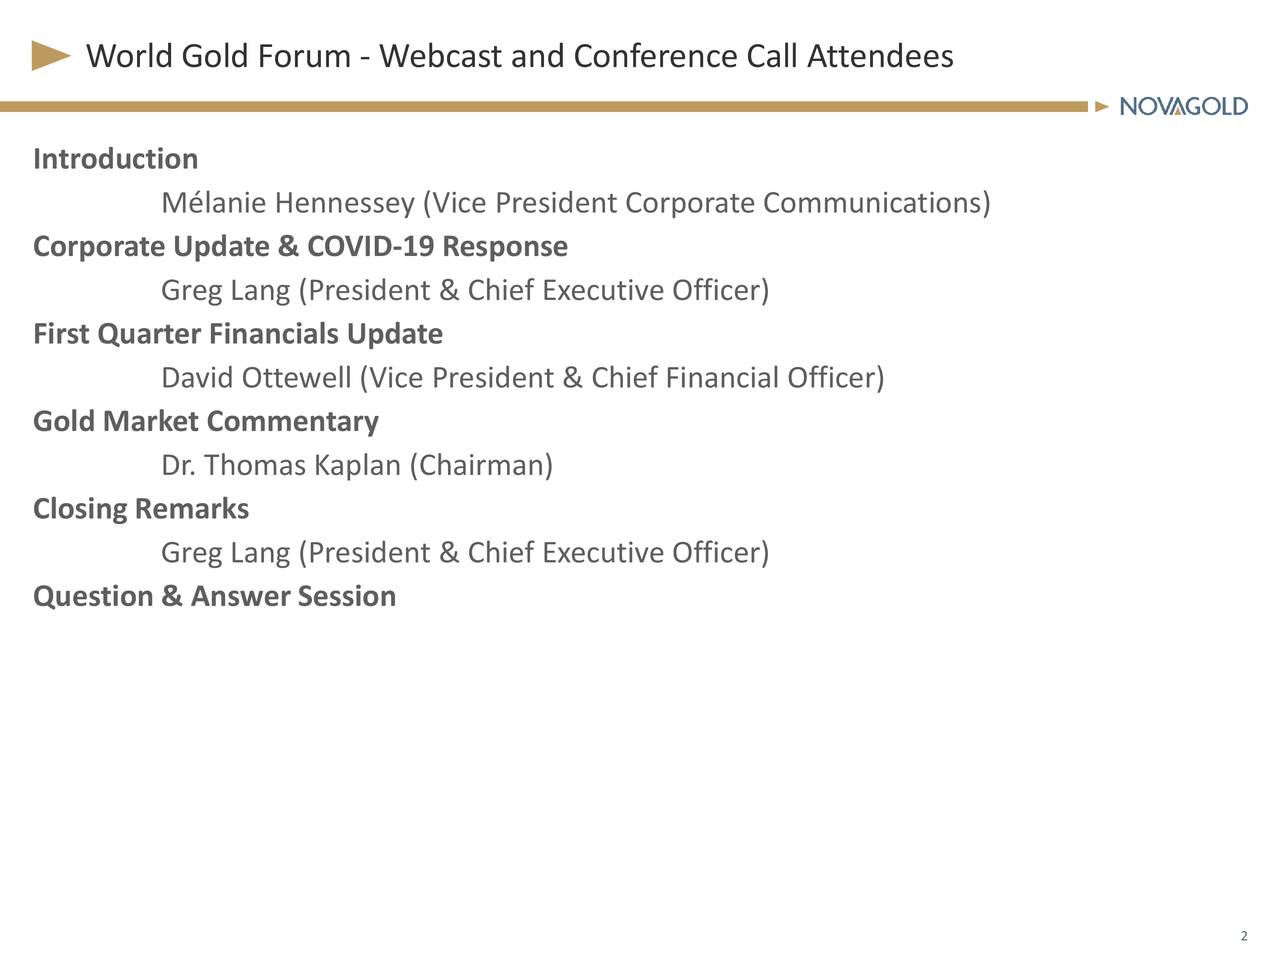 World Gold Forum - Webcast and Conference Call Attendees